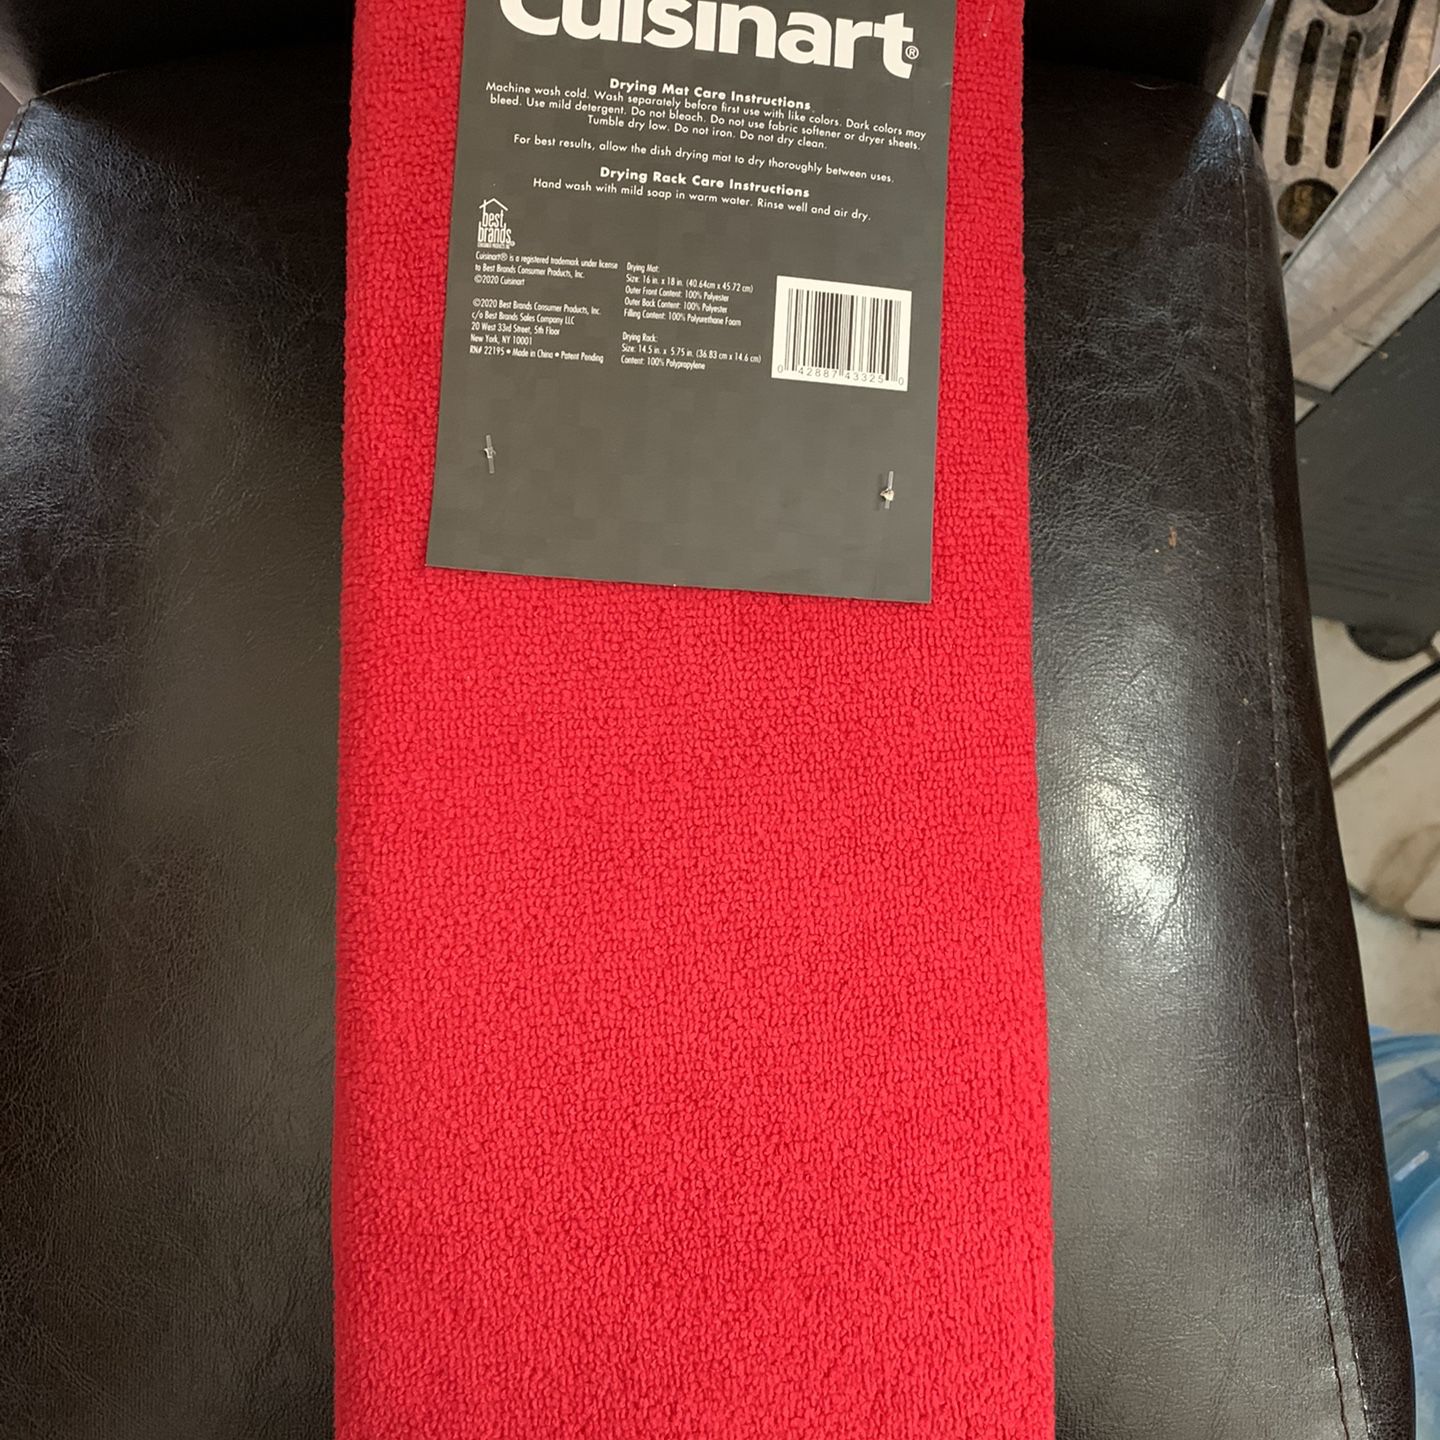 NEW! Cuisinart Dish Drying Mat with Drying Rack 18 x 16 Red